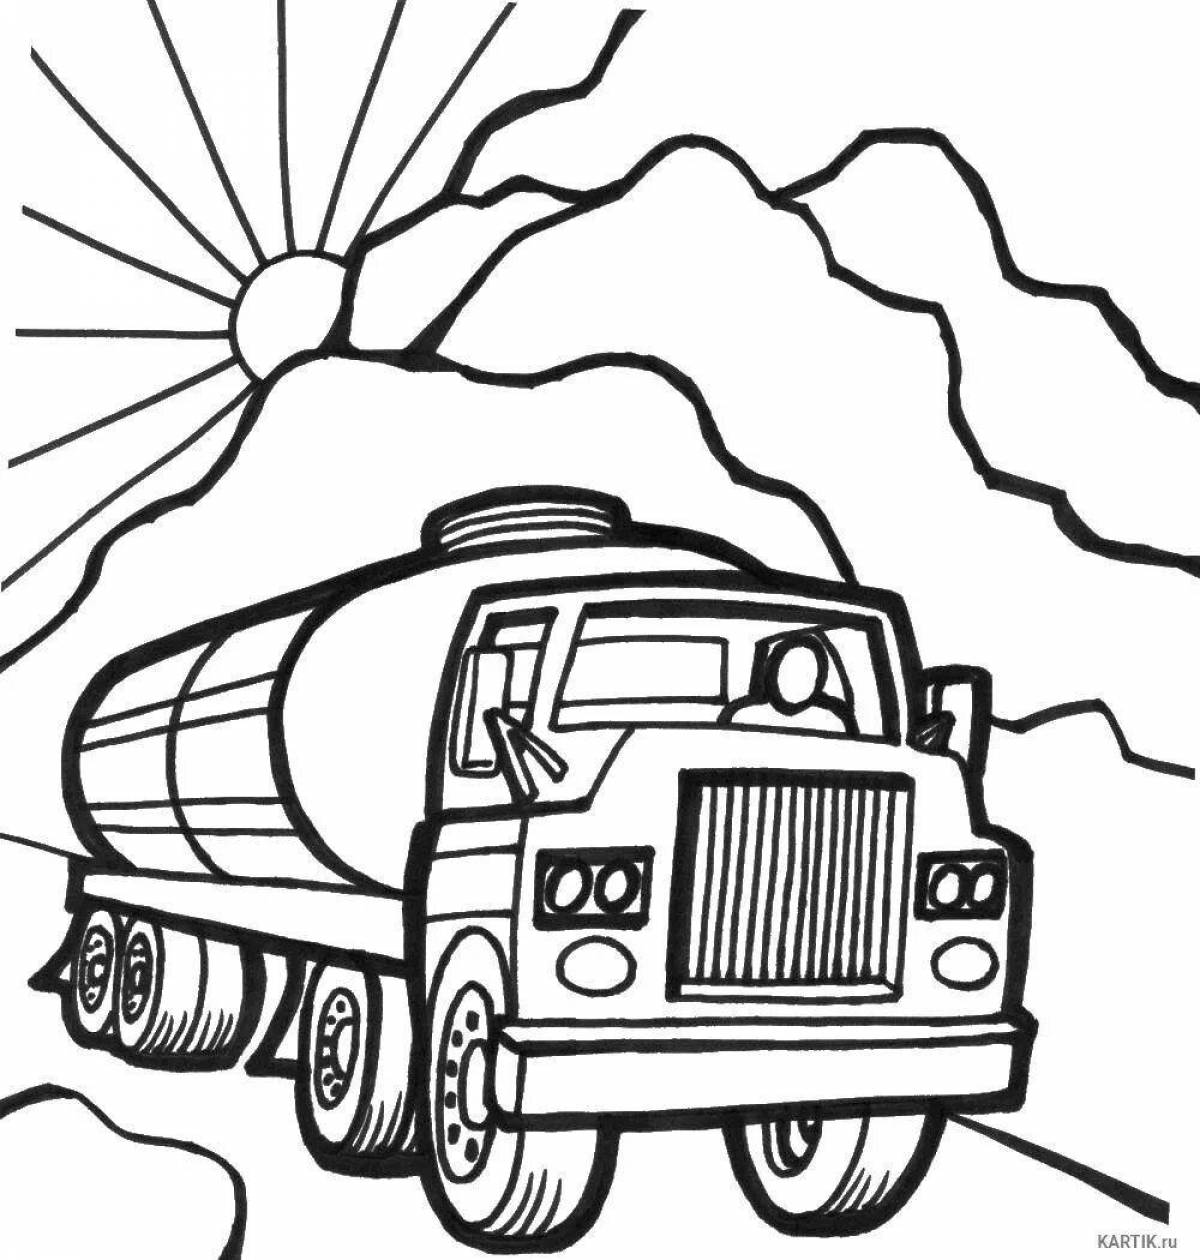 Fun truck coloring for kids